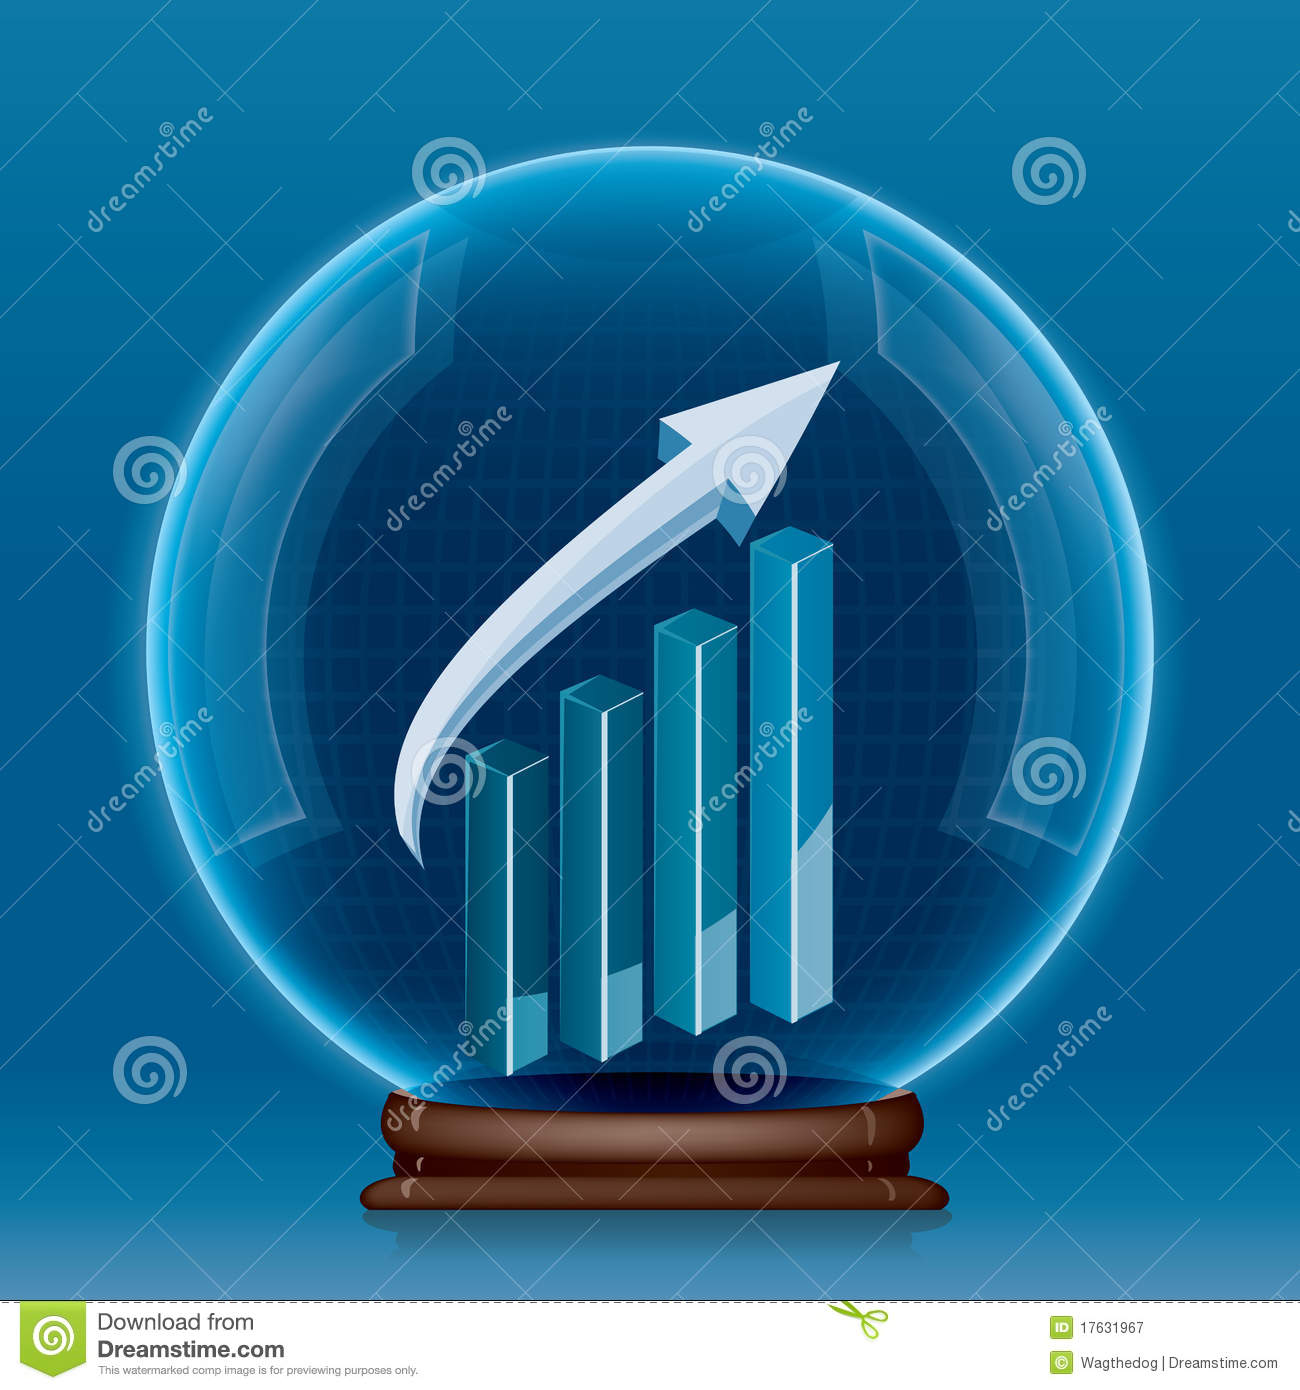 Future Success Royalty Free Stock Photography   Image  17631967